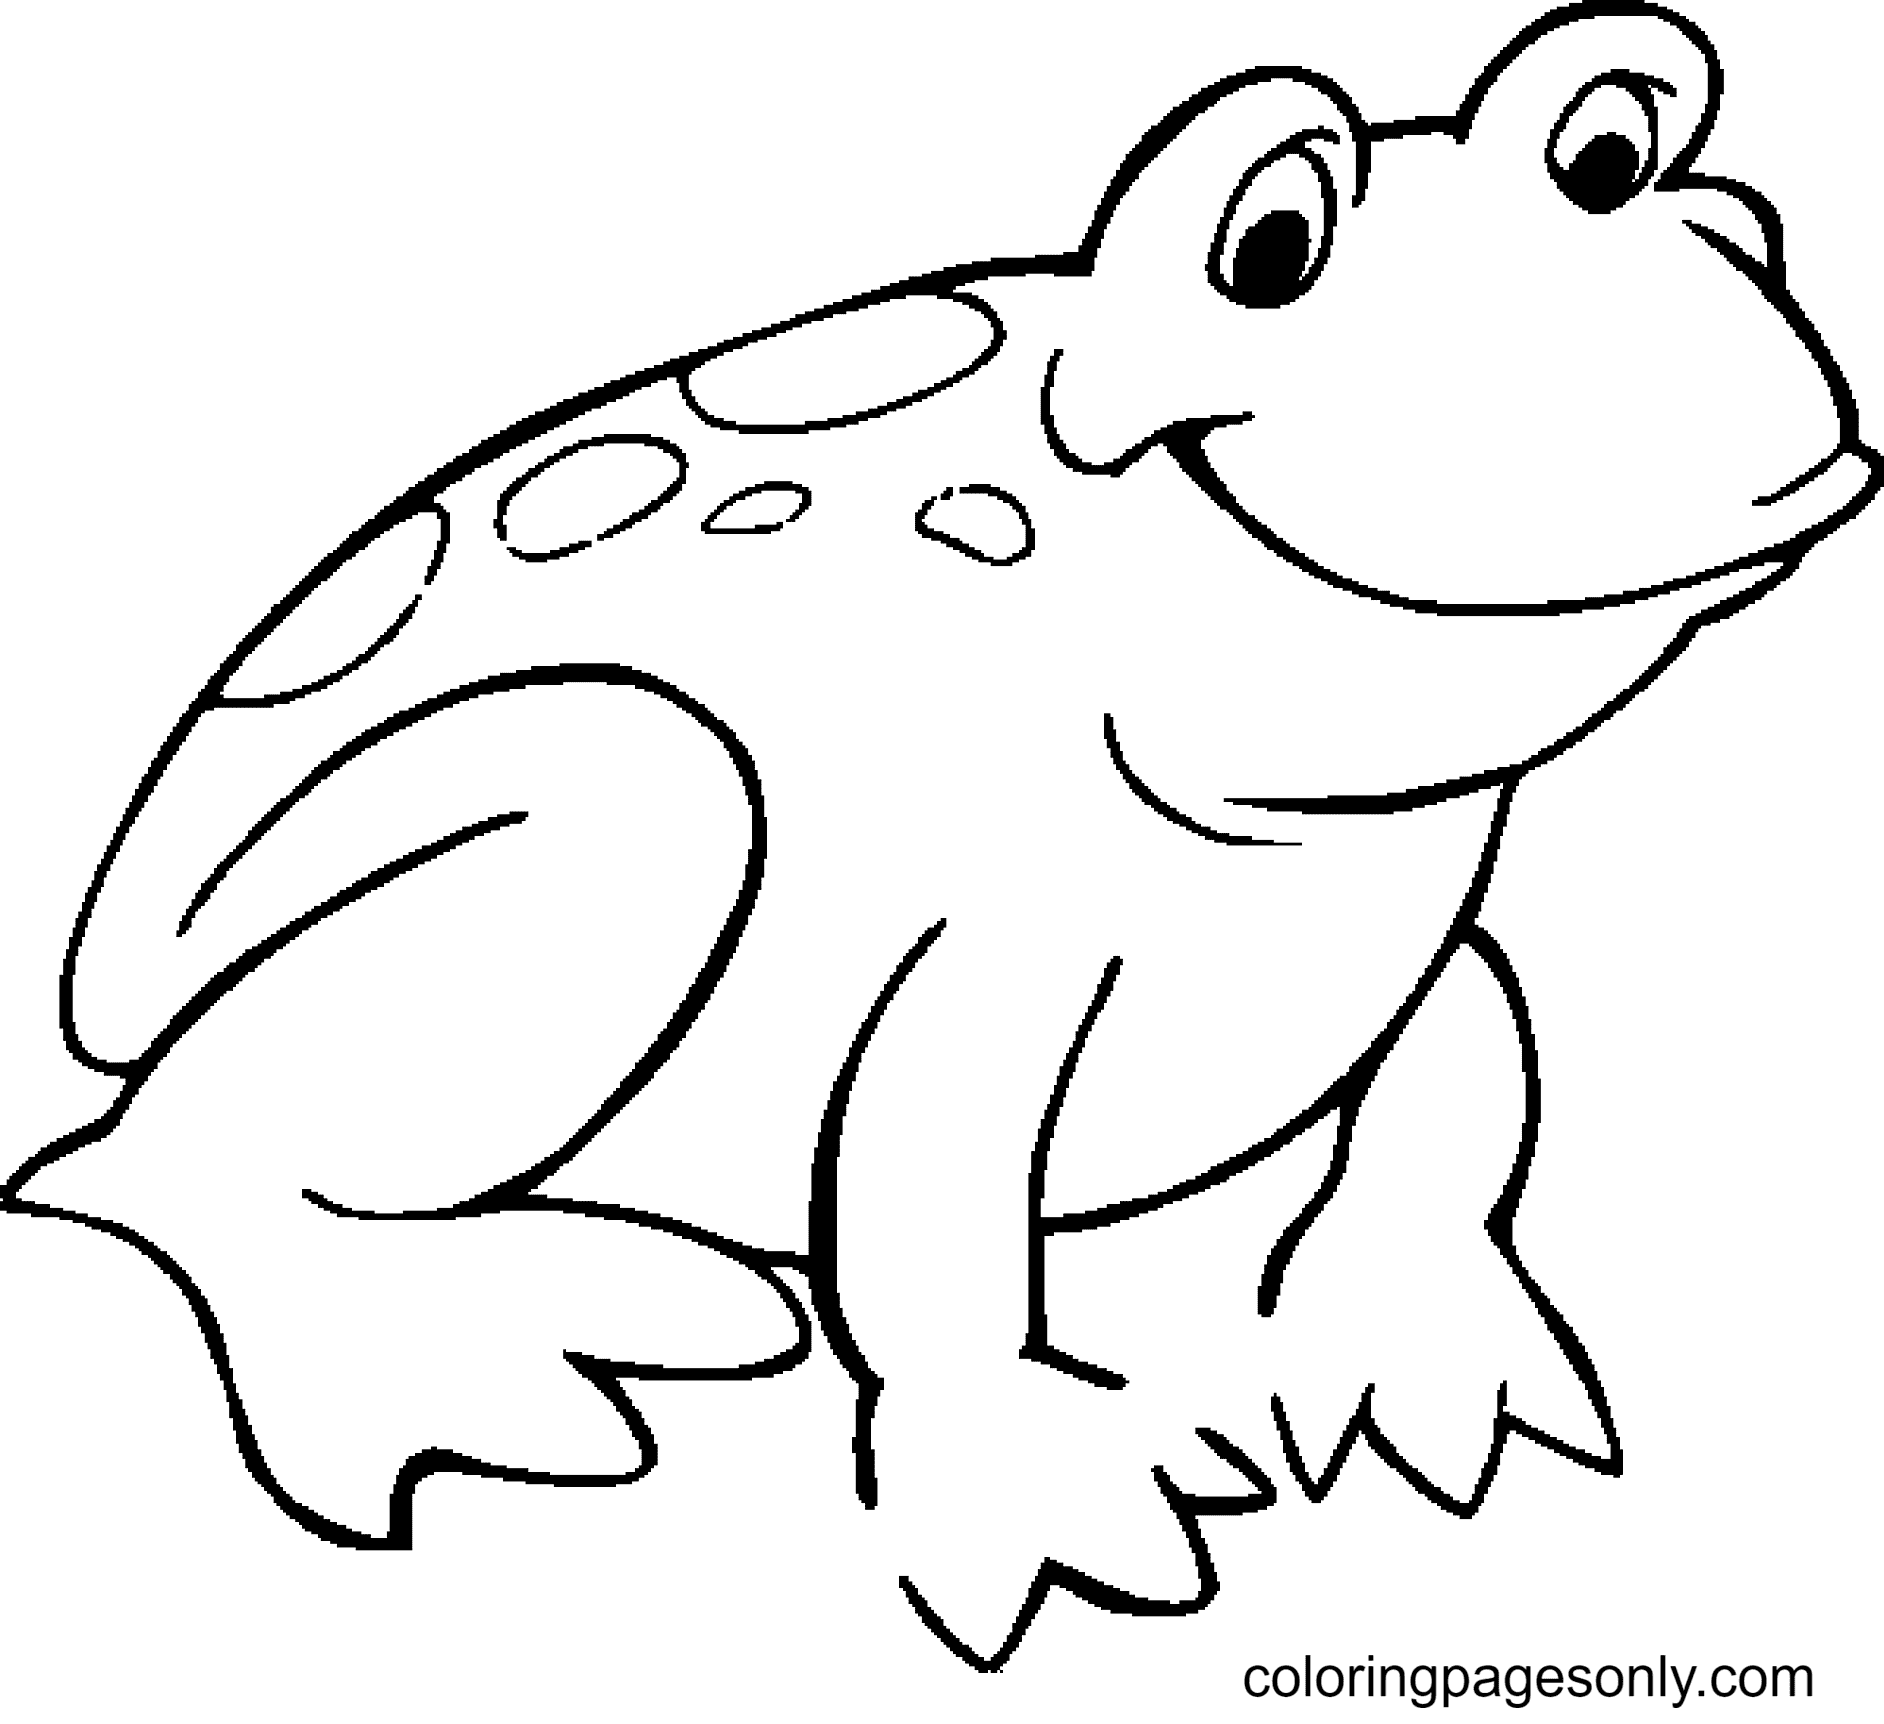 Smiling Frog Coloring Page